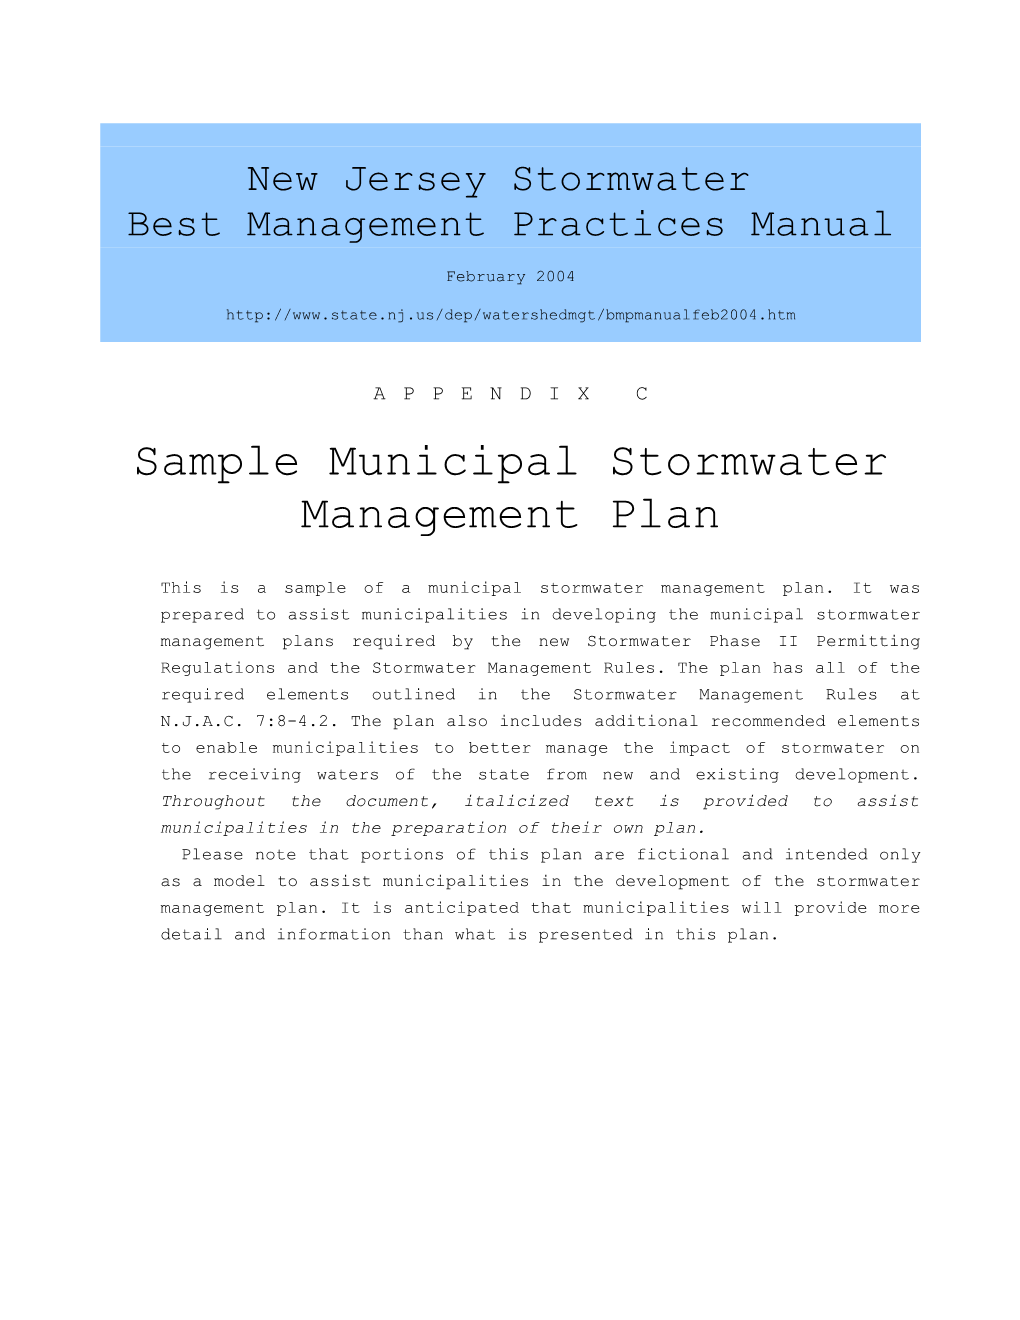 Stormwater and Nonpoint